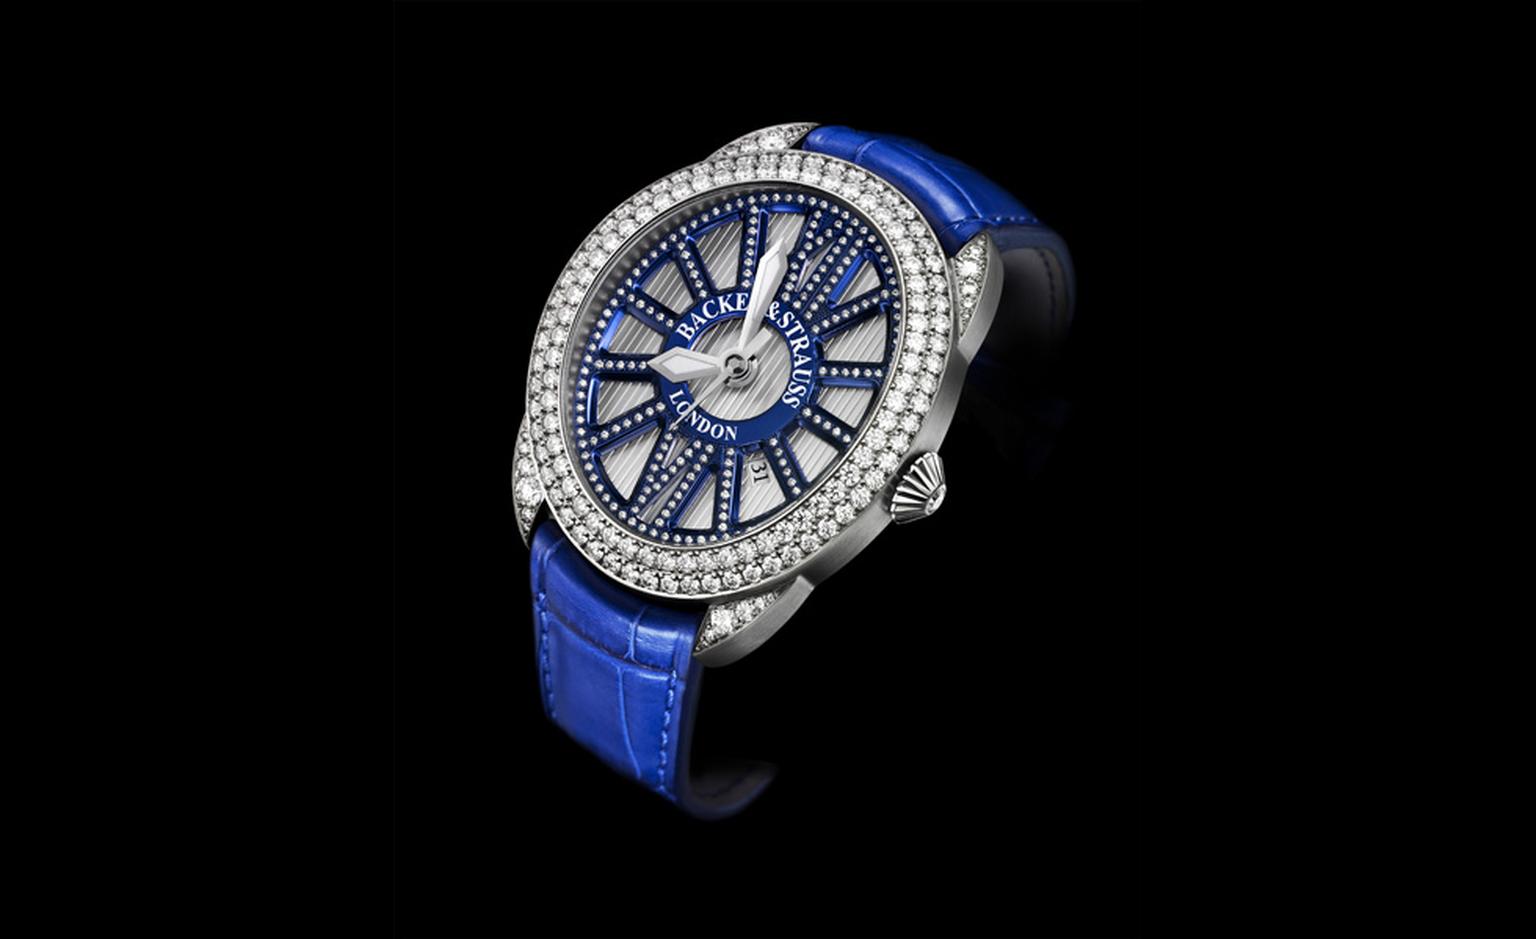 Backes & Strauss Beau Brummell watch in lightweight titanium with blued titanium dial details and 347 lovely ideal cut diamonds adding a touch of sparkle.